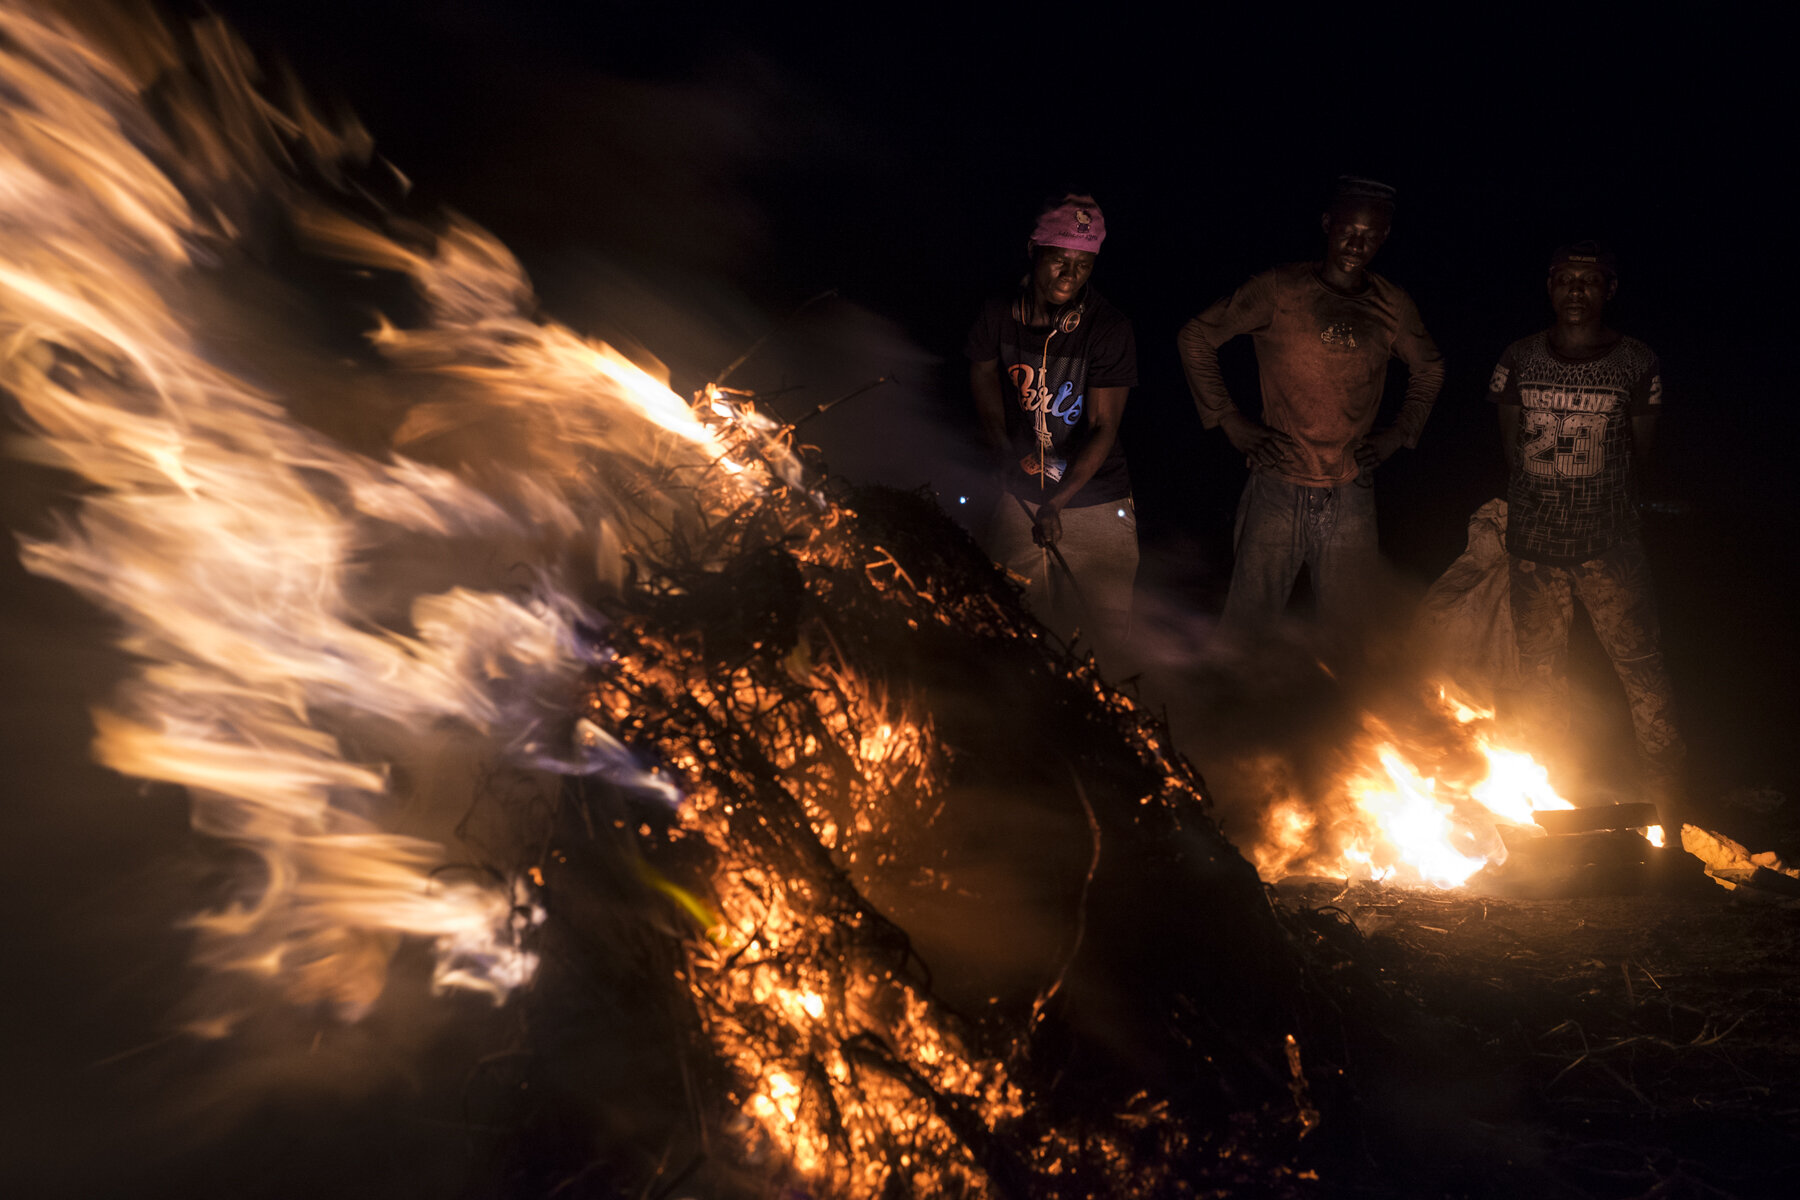  Ghana, Accra, October 2018. Alouta and Gaffarou are burning appliances and cables for another worker, in the Agbogbloshie scrap yard. Big fires are set at night to burn and extract as much raw material as possible, then go back in the morning and st